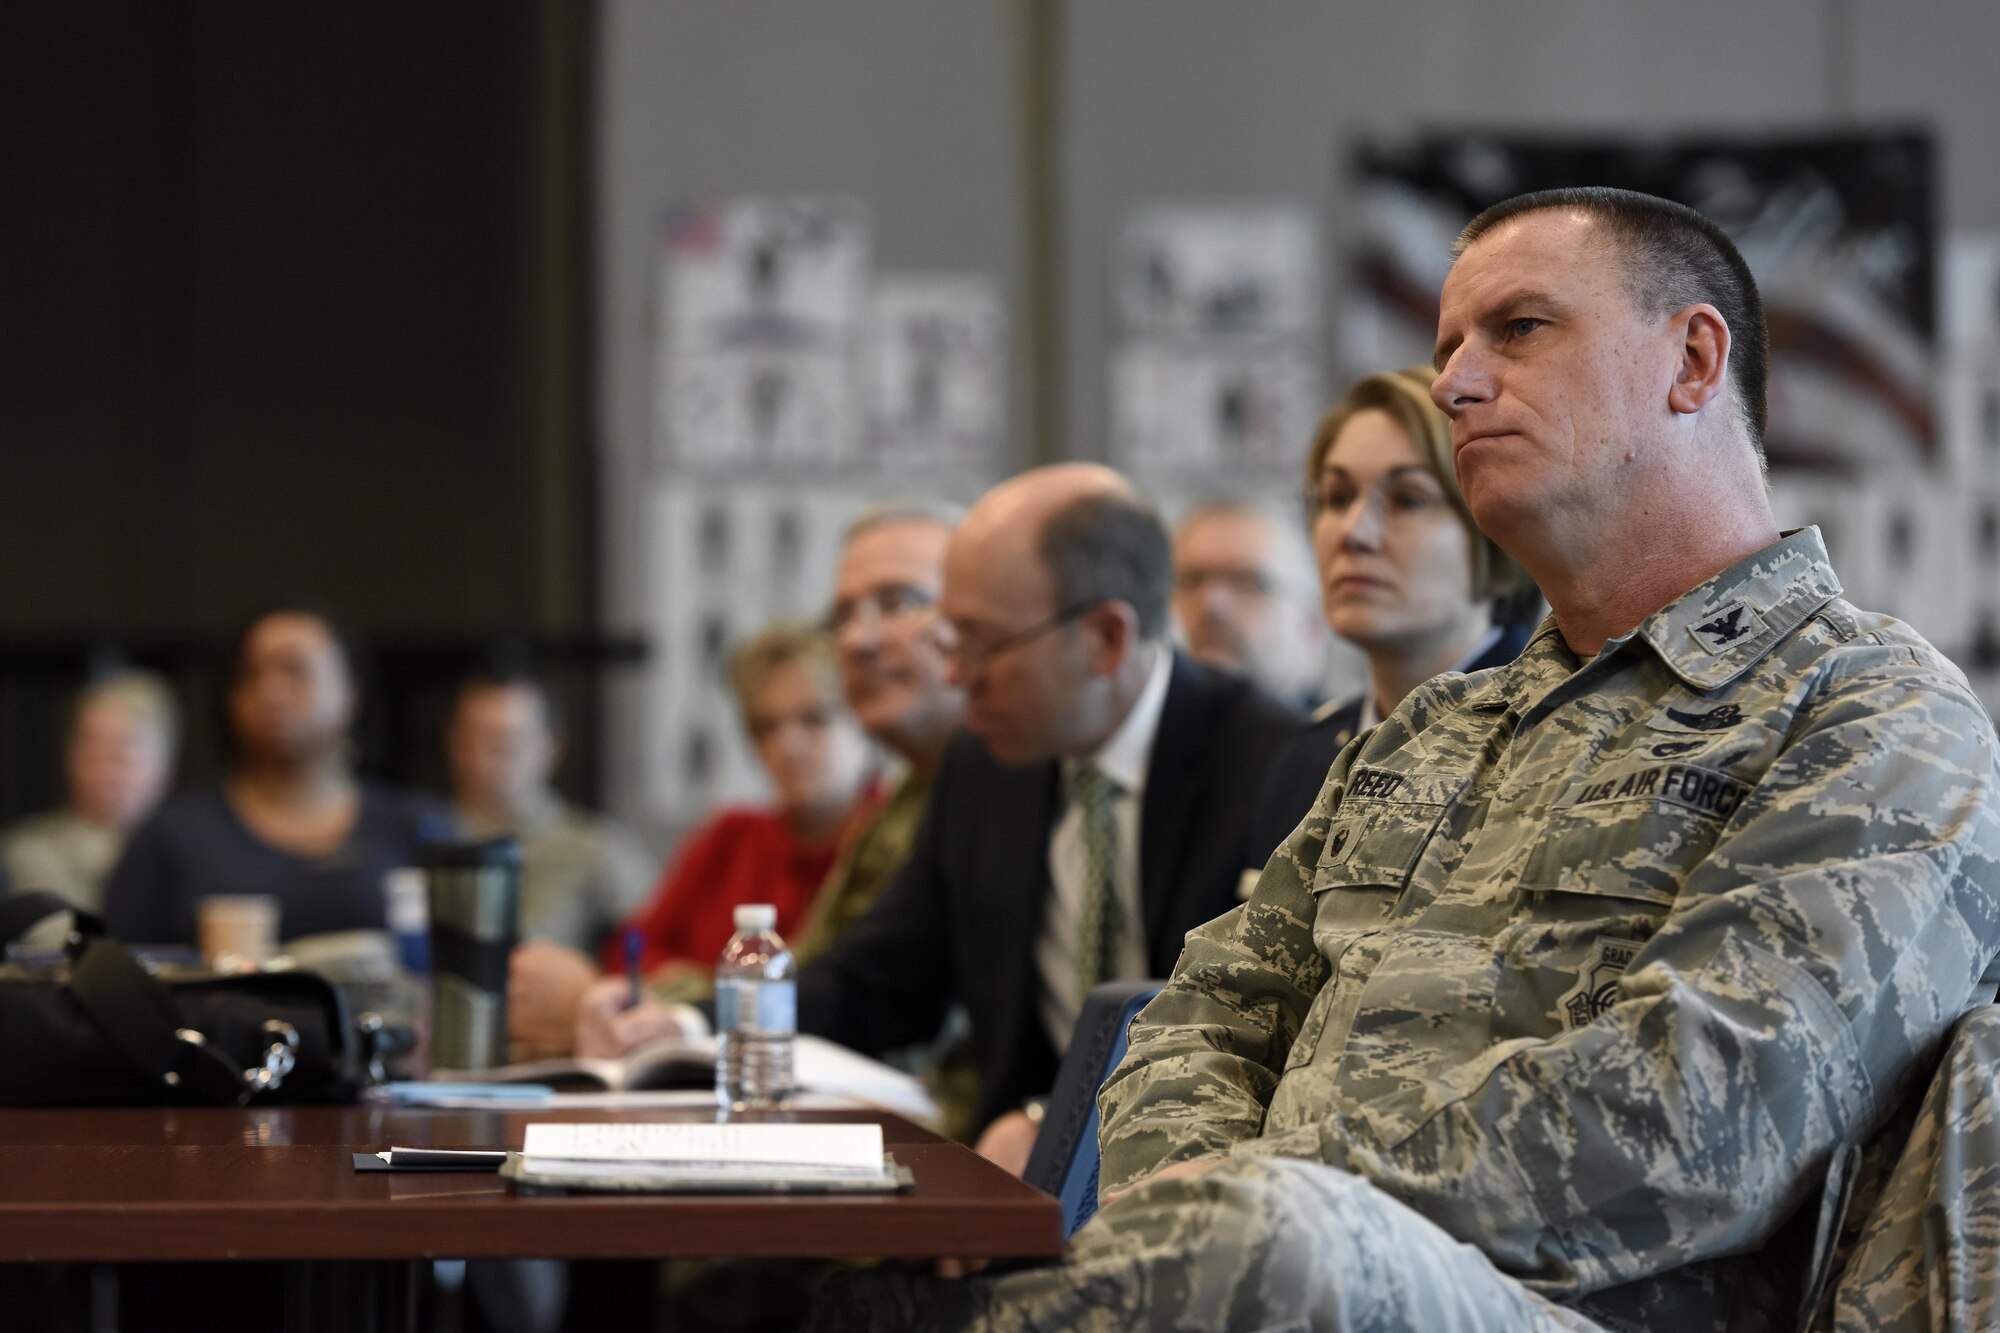 U.S. Air Force Col. Scott Reed, vice wing commander of the 180th Fighter Wing, Ohio Air National Guard, listens to a guest speaker during an Air Force Community Partnership agreement signing March 22, 2017, at the 180FW in Swanton, Ohio. The AFCP program has inspired 61 installations nationwide to partner with their local communities across a wide range of initiatives, tapping into the intellectual capital and innovative spirit of Airmen and community leaders across the nation to develop creative ways to accomplish the U.S. Air Force mission and strengthen local communities. (U.S. Air National Guard photo by Staff Sgt. Shane Hughes)